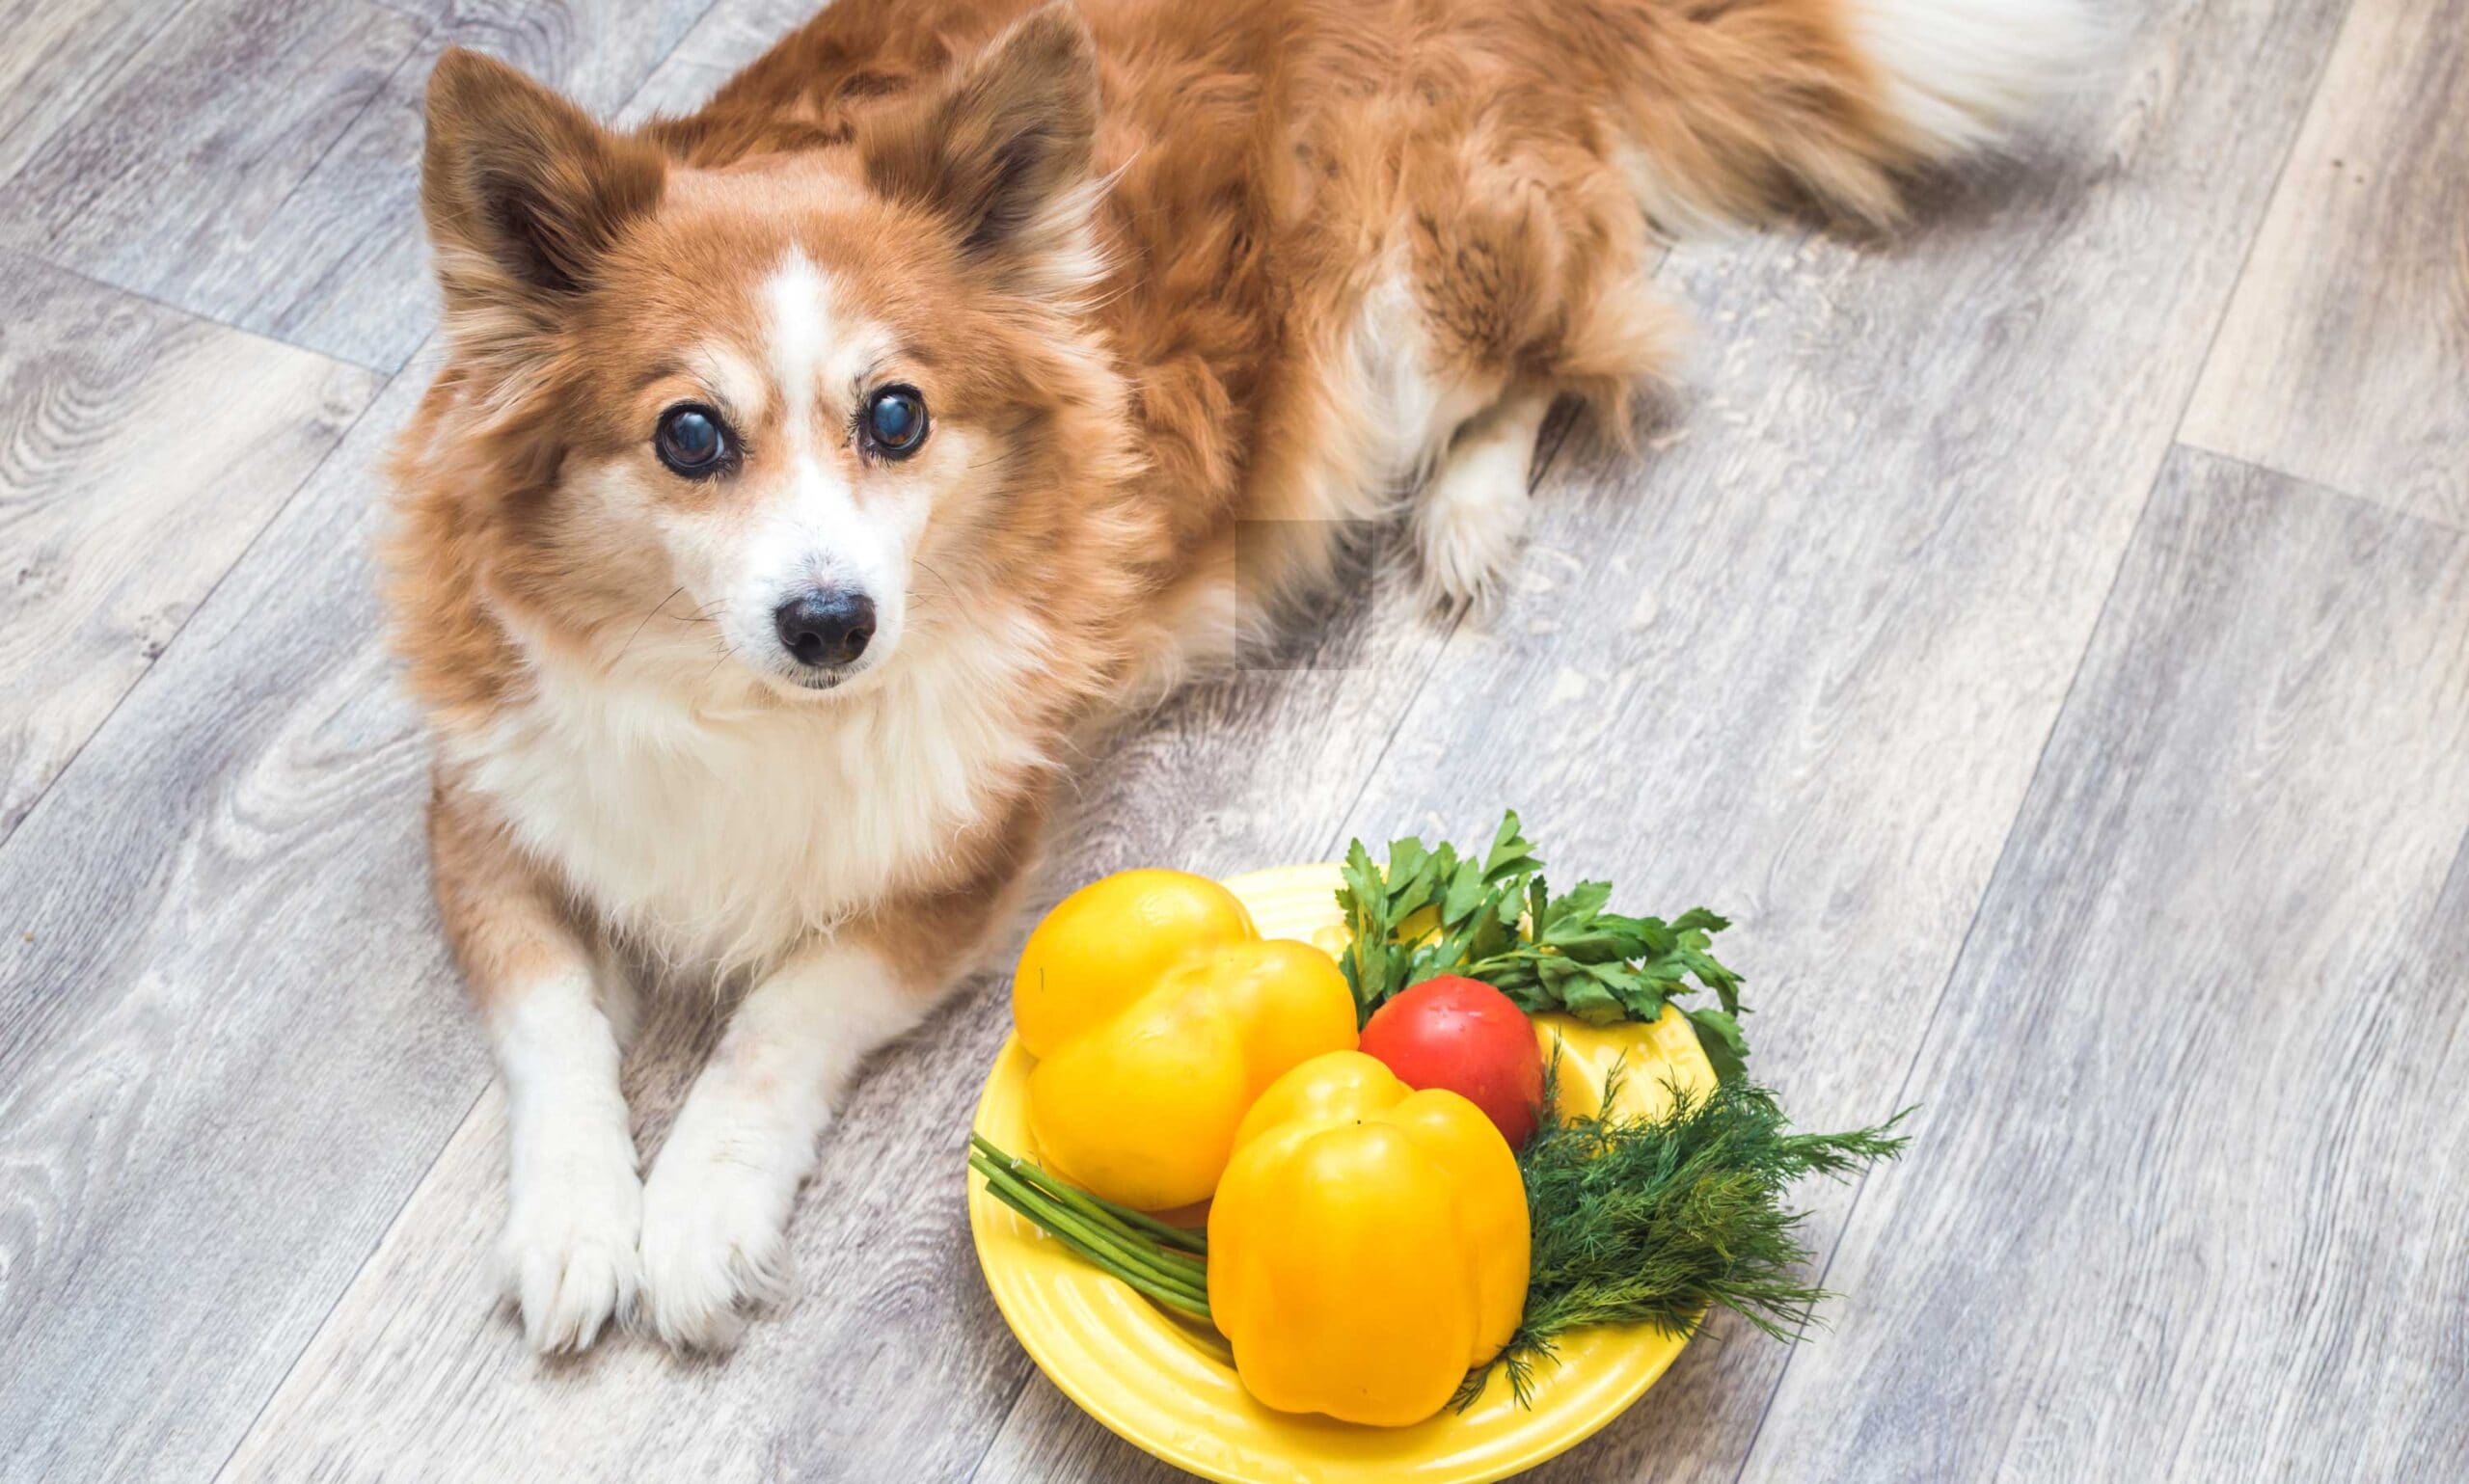 can dogs eat bell peppers: dog laying next to plate of yellow bell peppers and other veggies